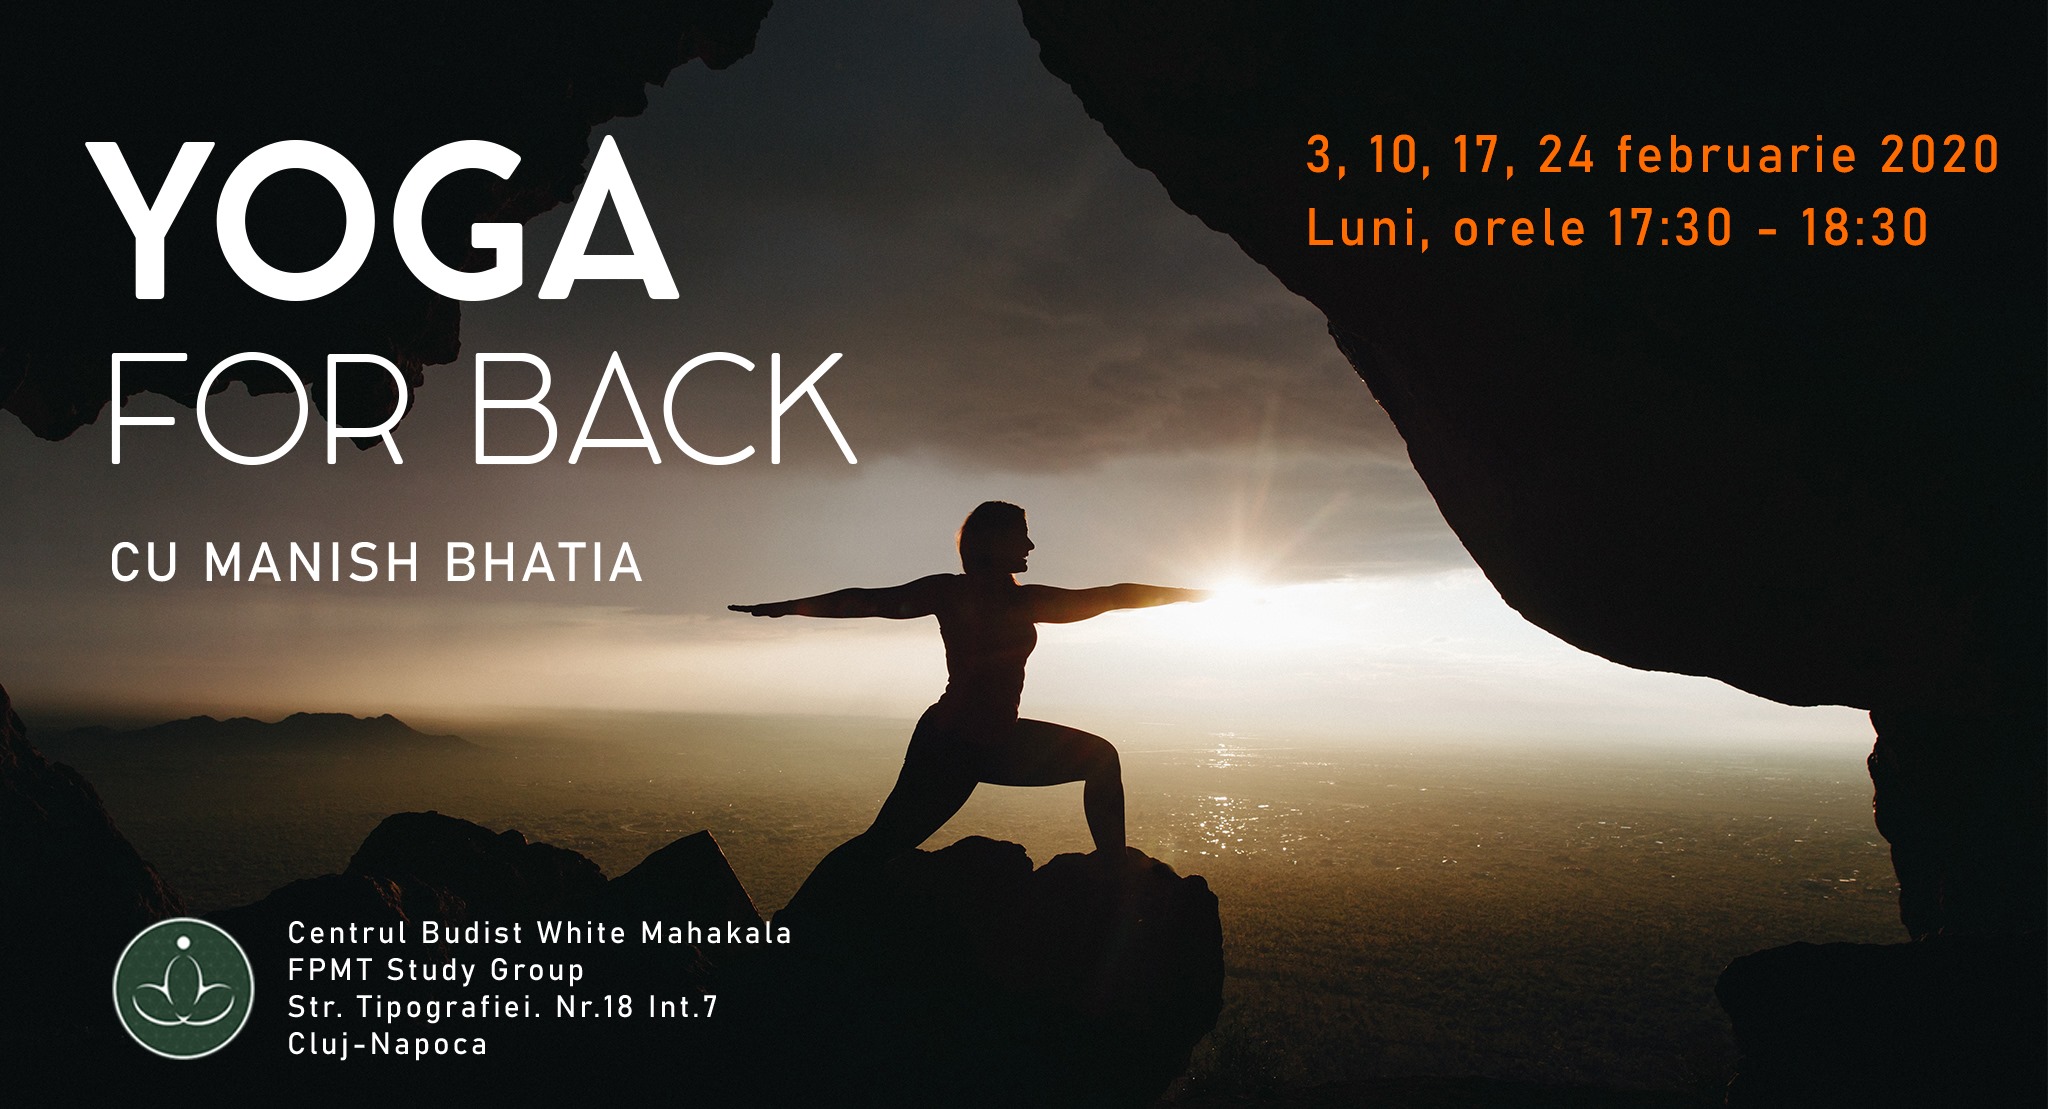 Yoga for Back with Manish